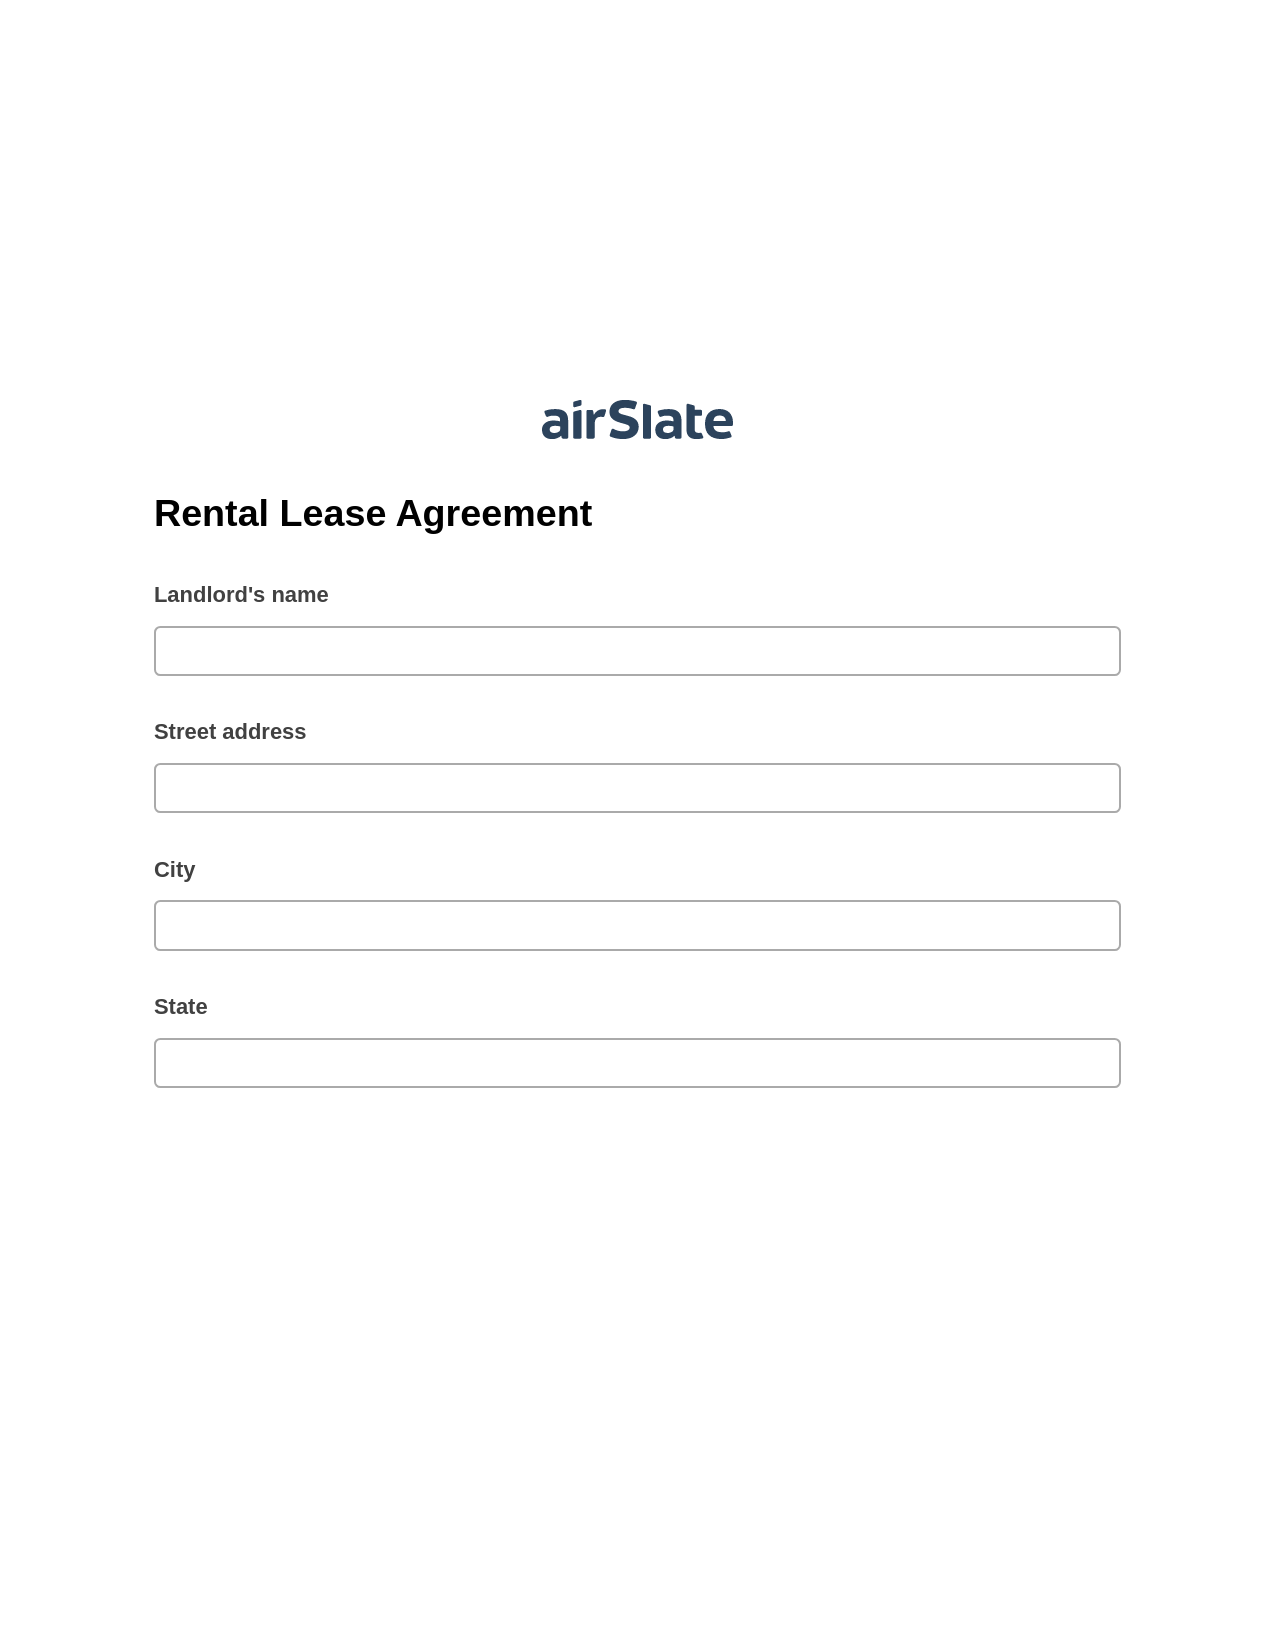 Rental Lease Agreement Pre-fill Dropdown from Airtable, Update NetSuite Records Bot, Google Drive Bot